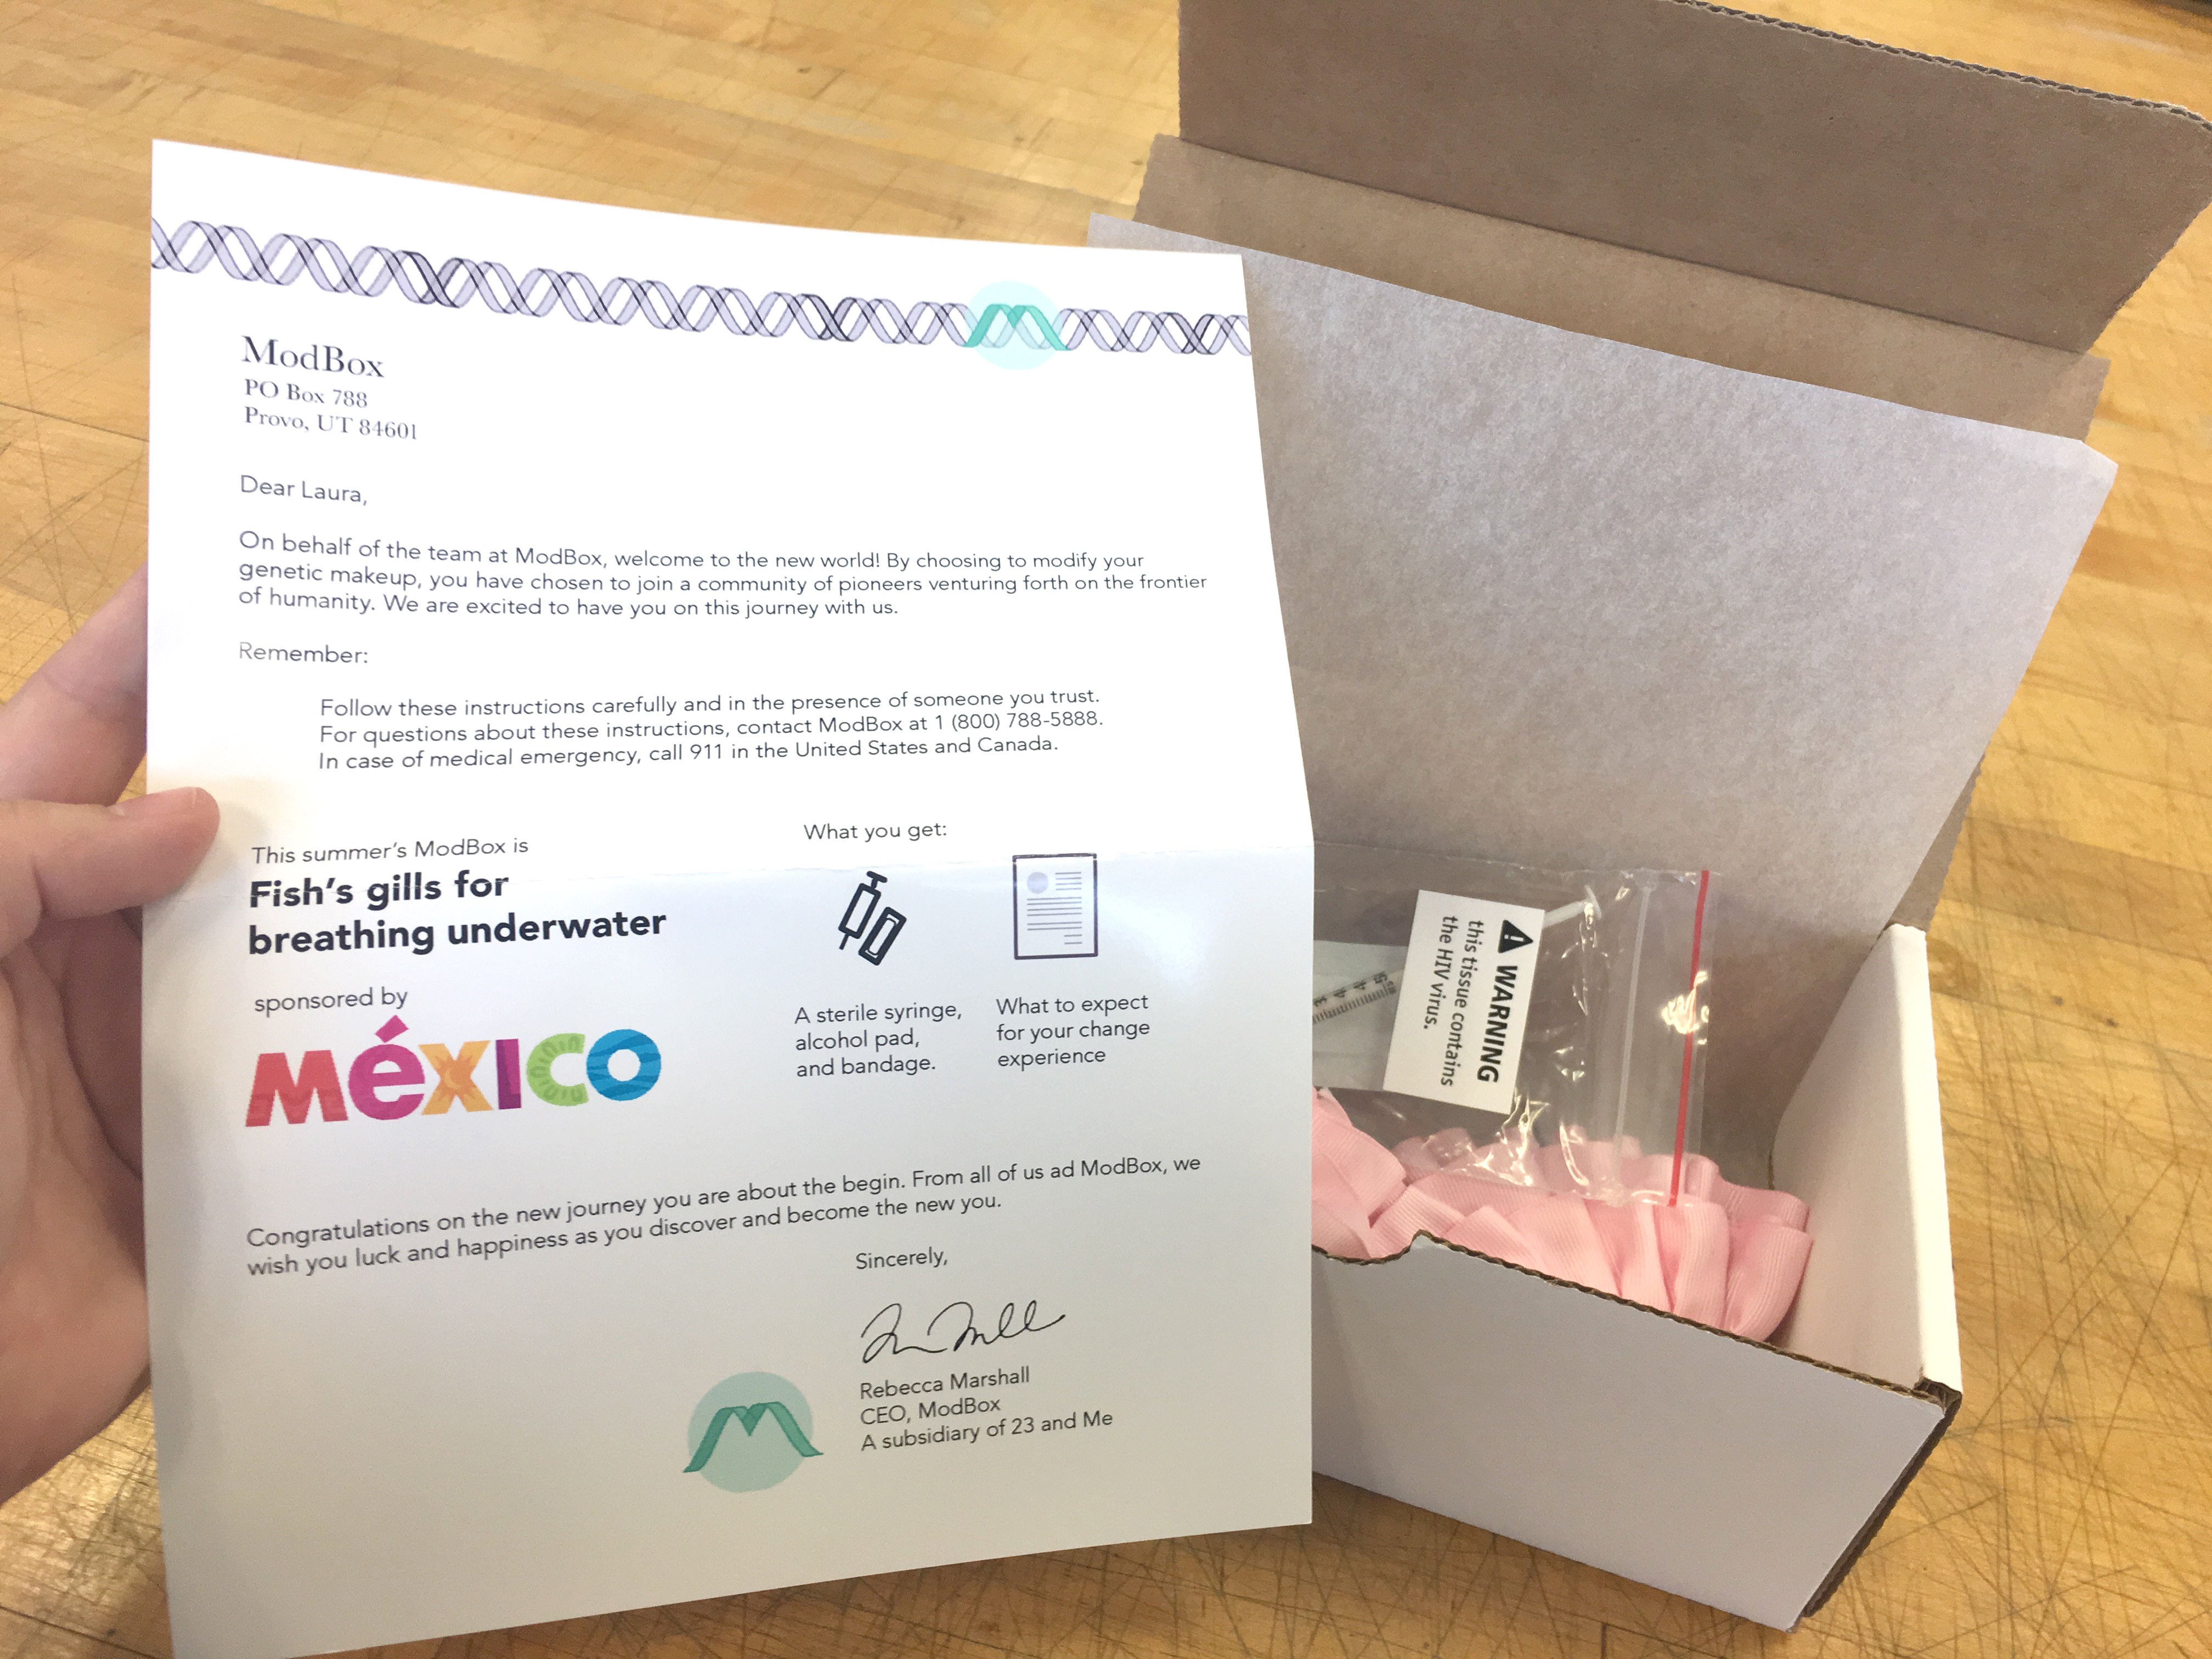 The box is open and includes a letter welcoming the customer to the frontier of humanity. The box includes a syringe and supplies to genetically modify a human with fish gills for breathing underwater. It's sponsored by Mexico tourism.